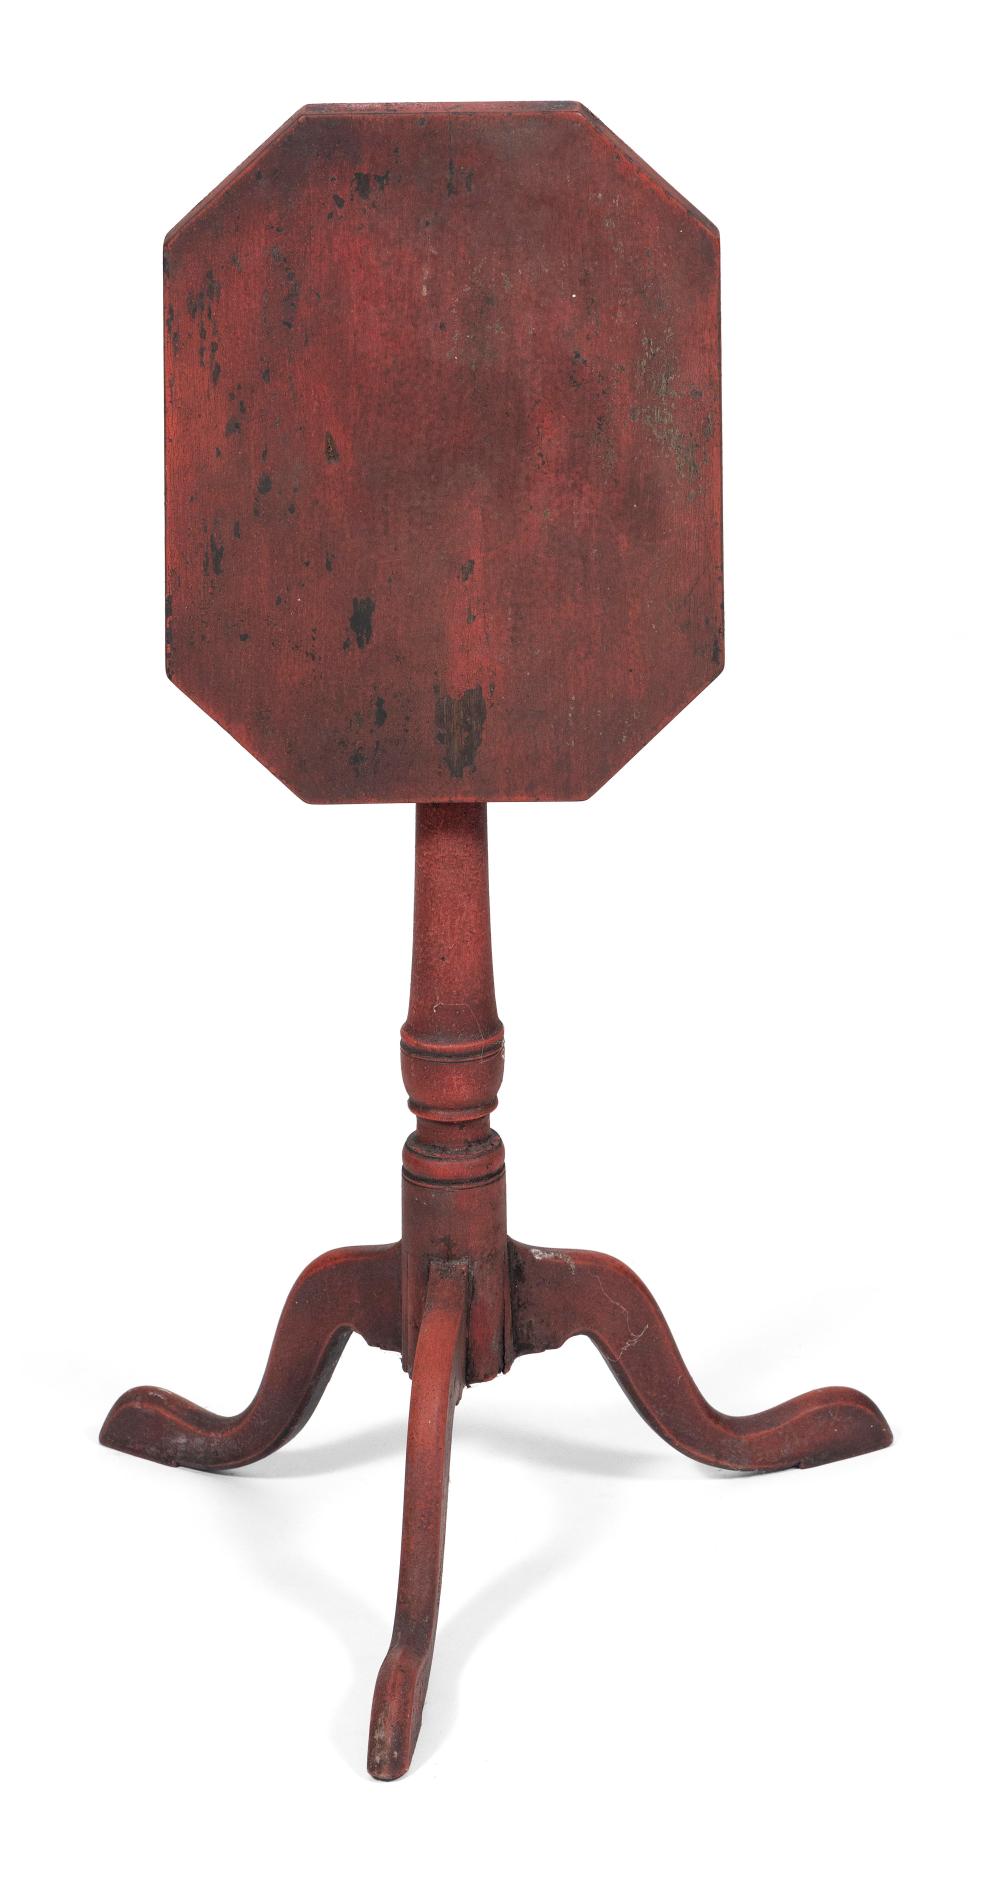 TILT-TOP CANDLESTAND PROBABLY NEW